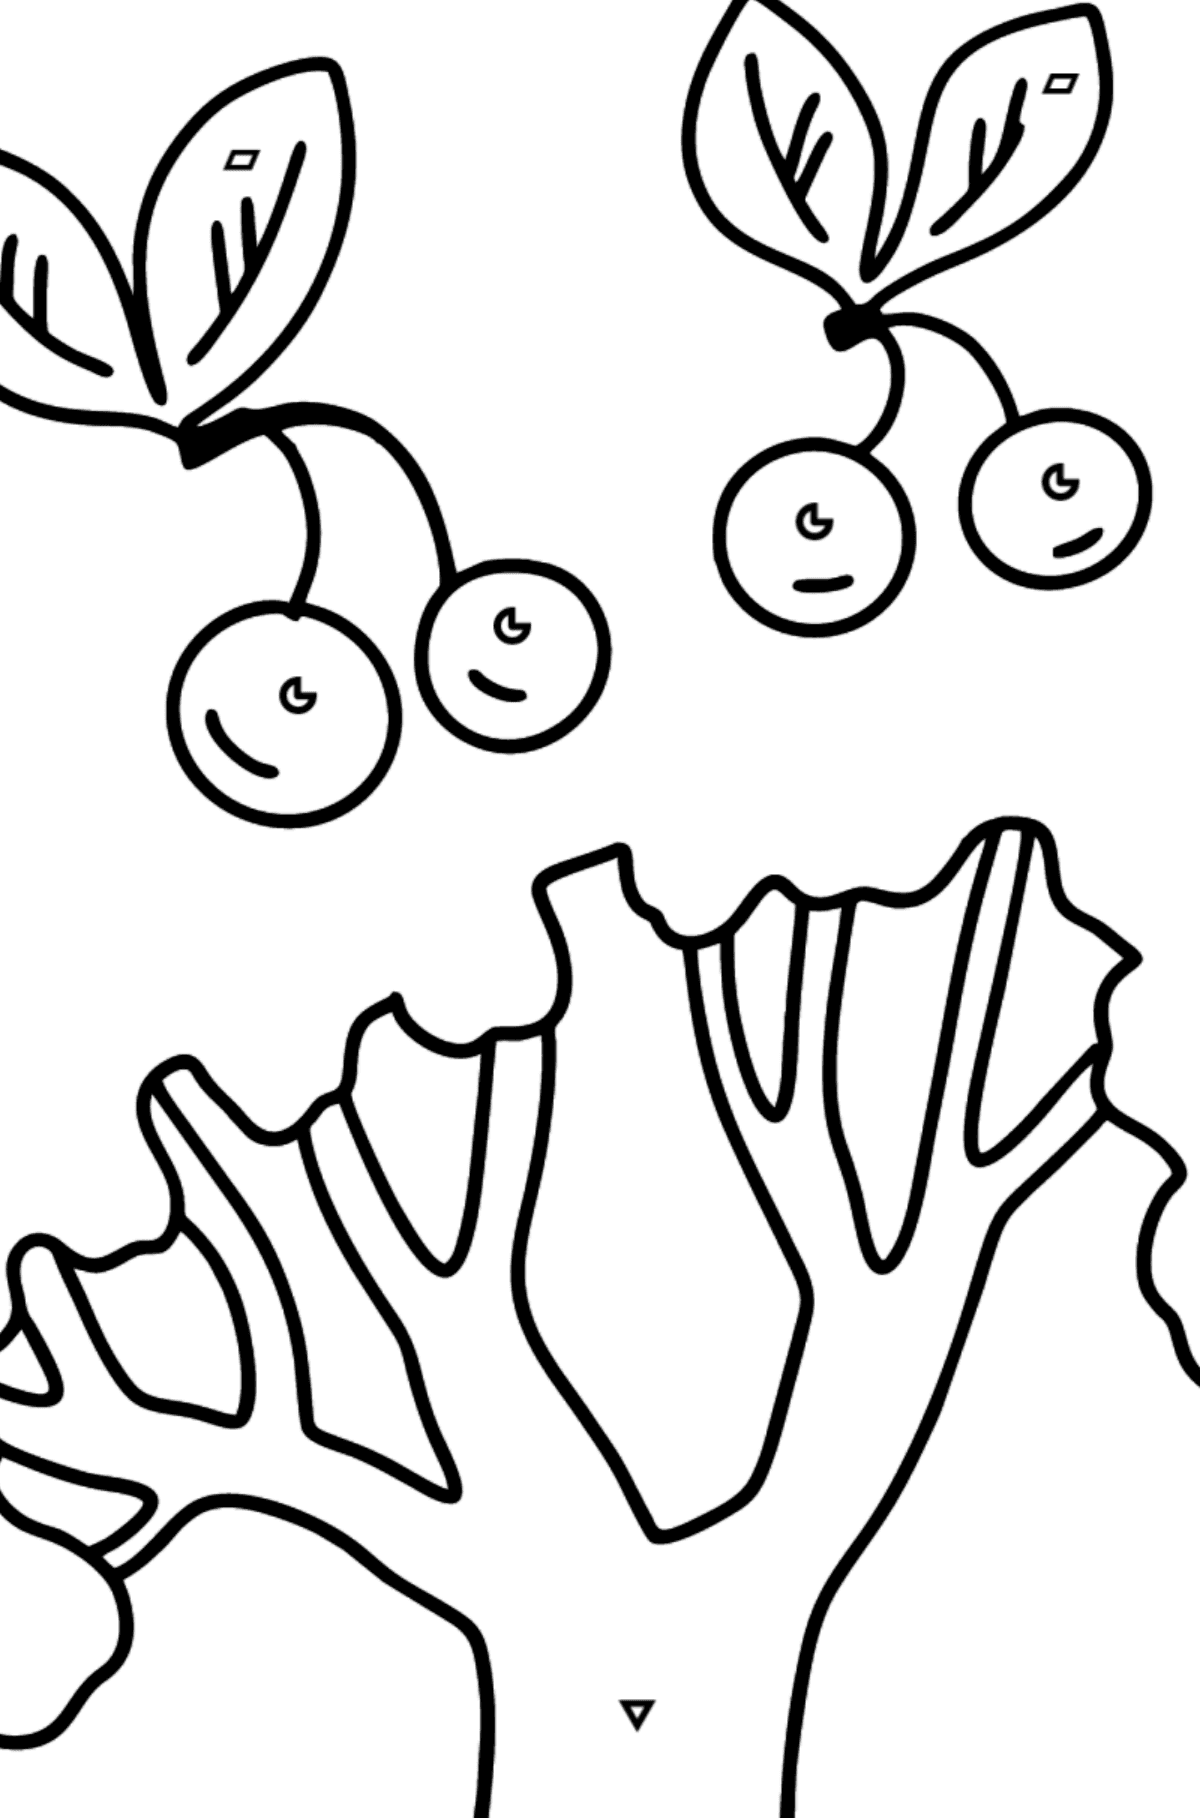 Cherry tree coloring page â online and print for free